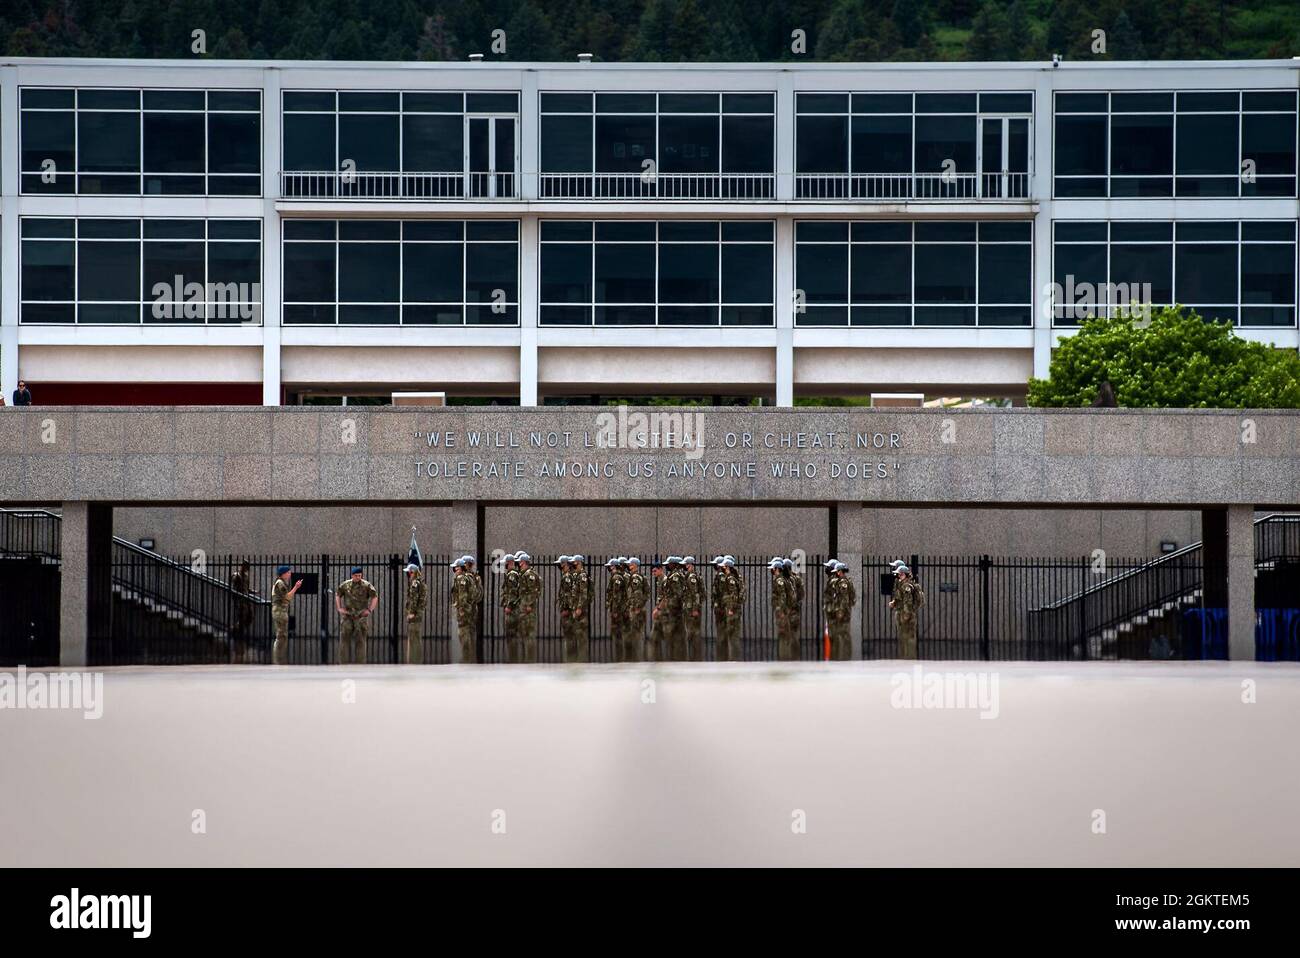 U.S. AIR FORCE ACADEMY, Colo. – Academy basic cadets participate in the first phase of basic cadet training with marching drills on the Terrazzo on June 29, 2021, at the U.S. Air Force Academy in Colorado Springs, Colo. Stock Photo